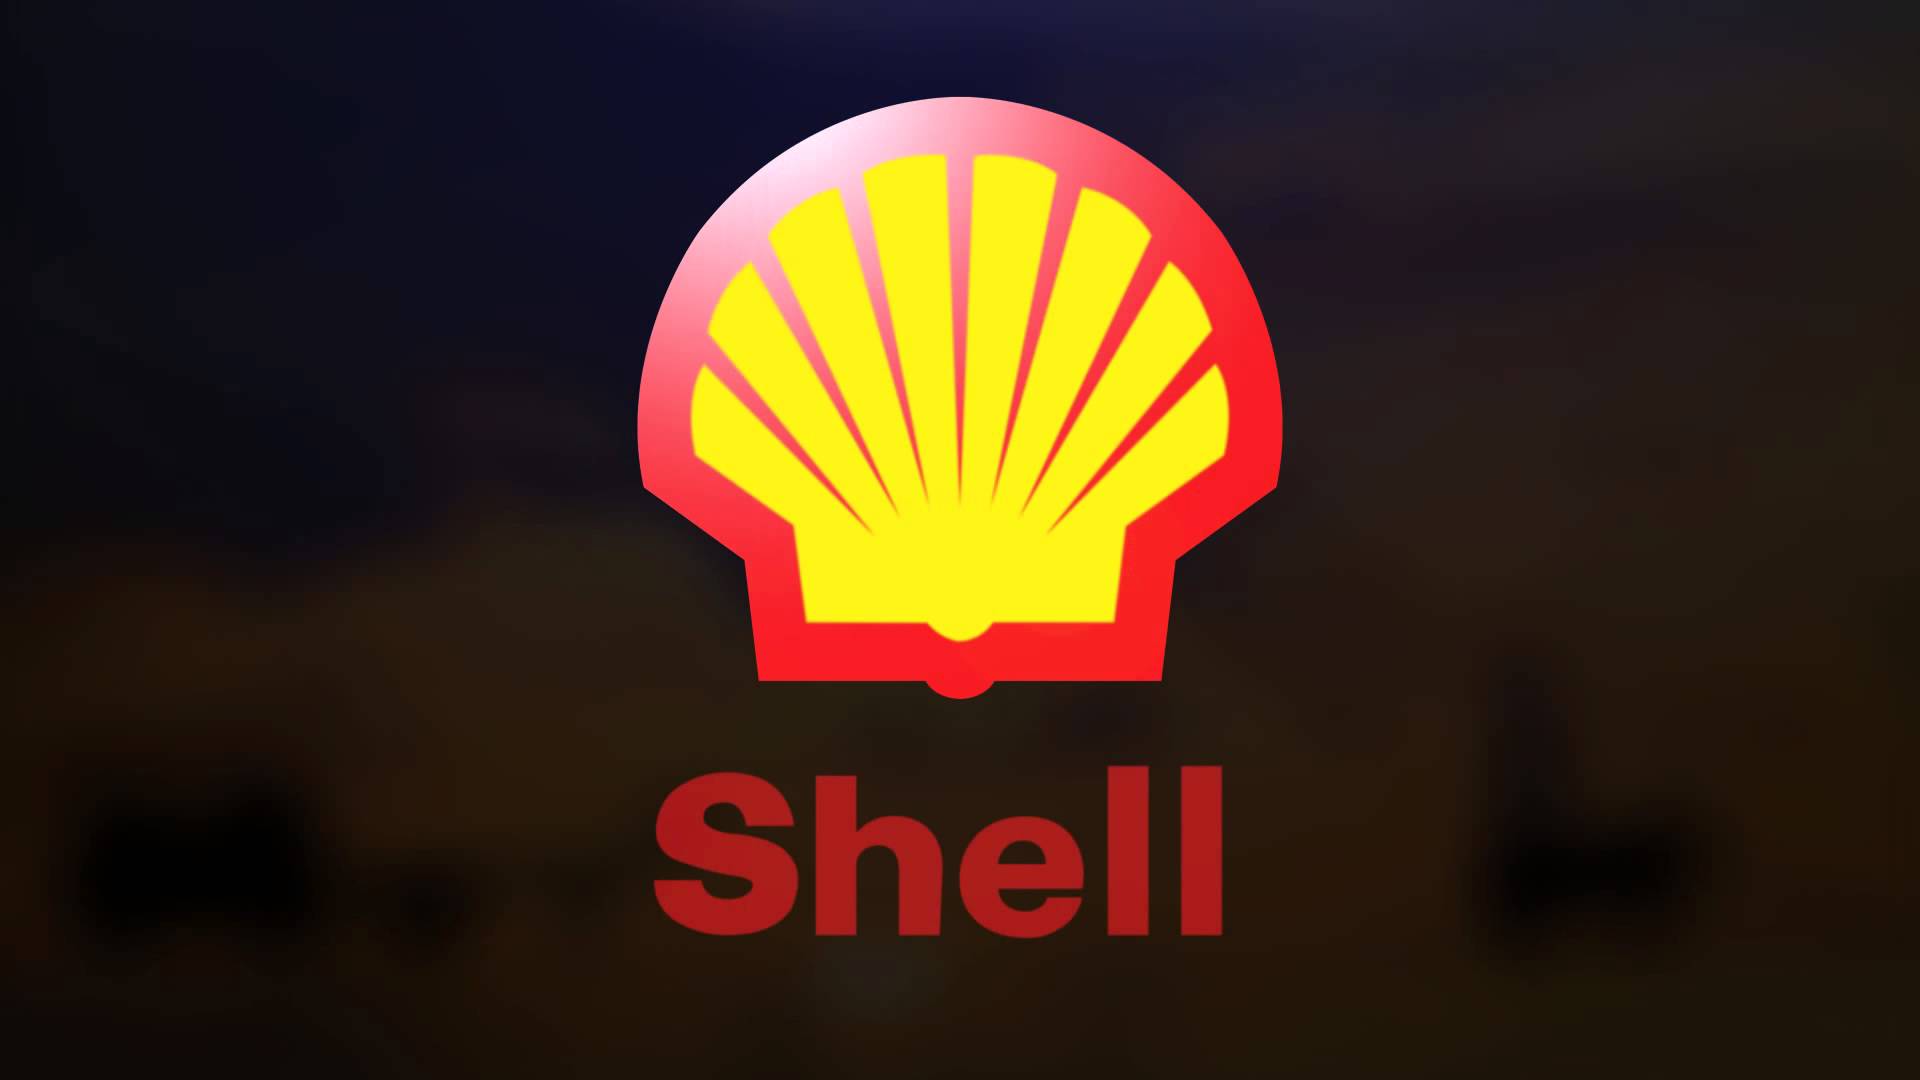 Nigerians lose UK Supreme Court’s case over Shell oil spill